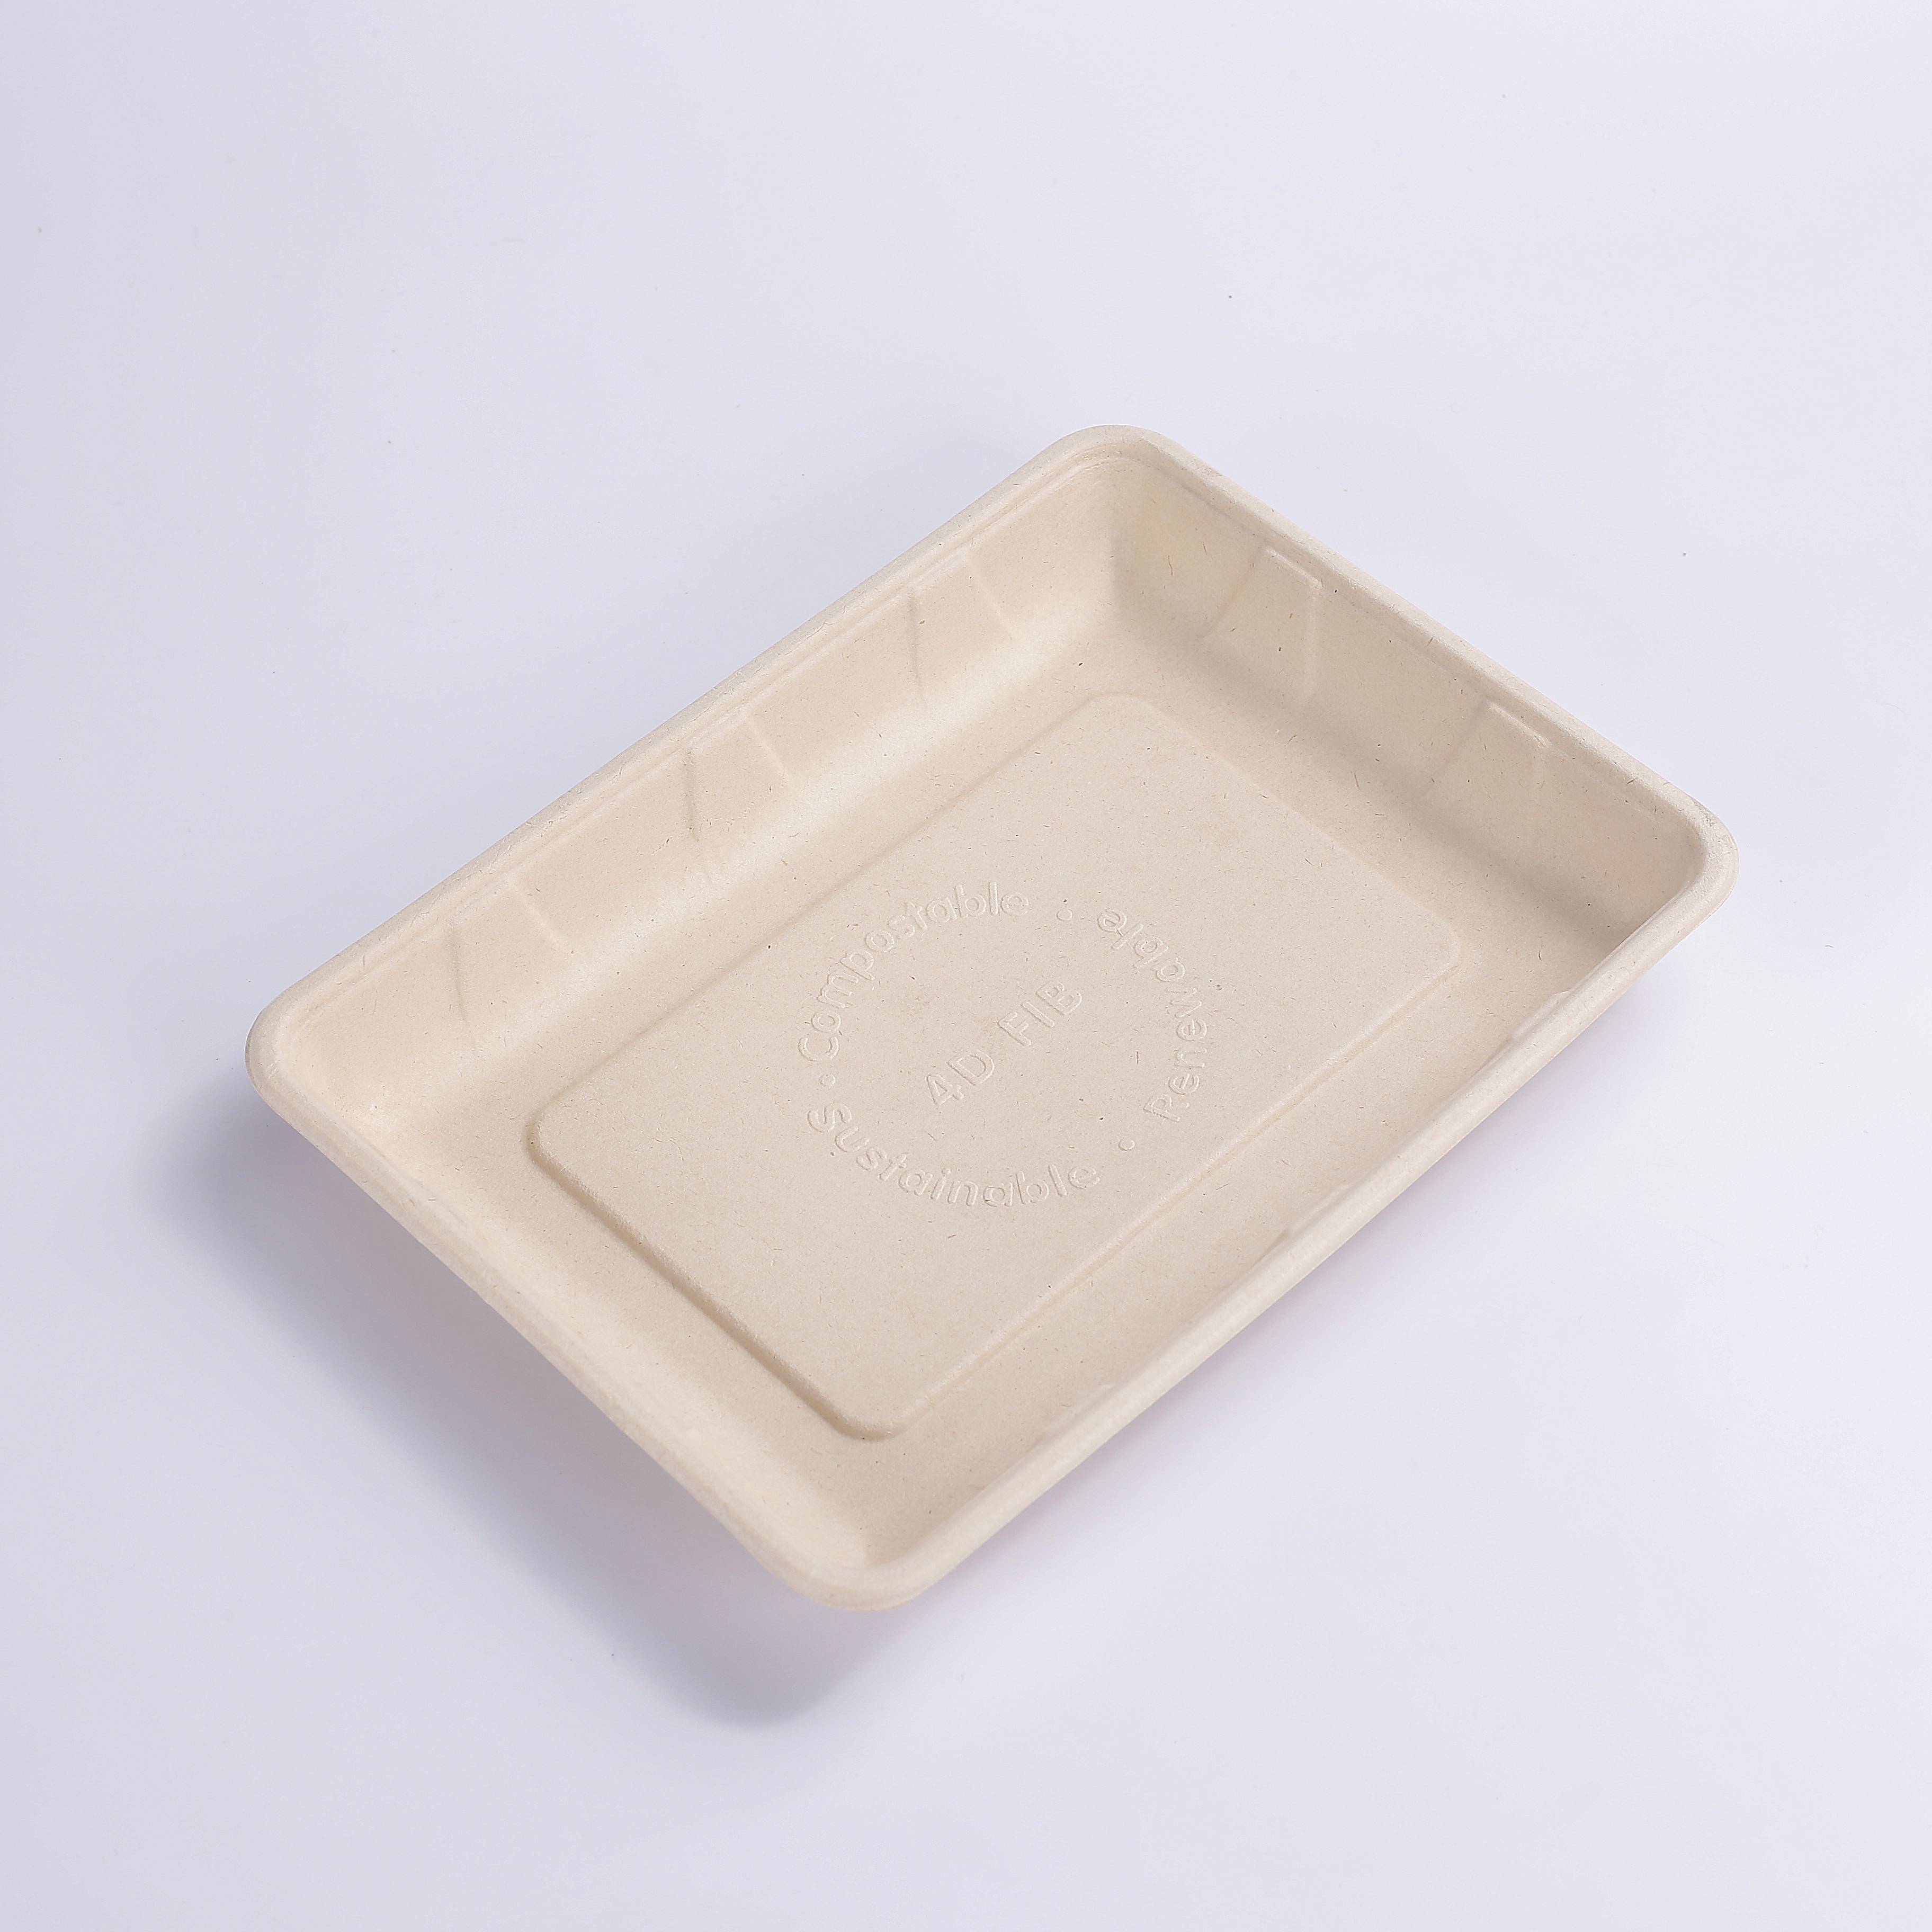 Manufacturing Companies for Food Trays Biodegradable Disposable - 9.5*7 INCH Compostable Heavy-Duty Disposable Food BBQ Fruit Tray, Microwave Paper Plates Waterproof and Oil-Proof Heavy Duty Trays...